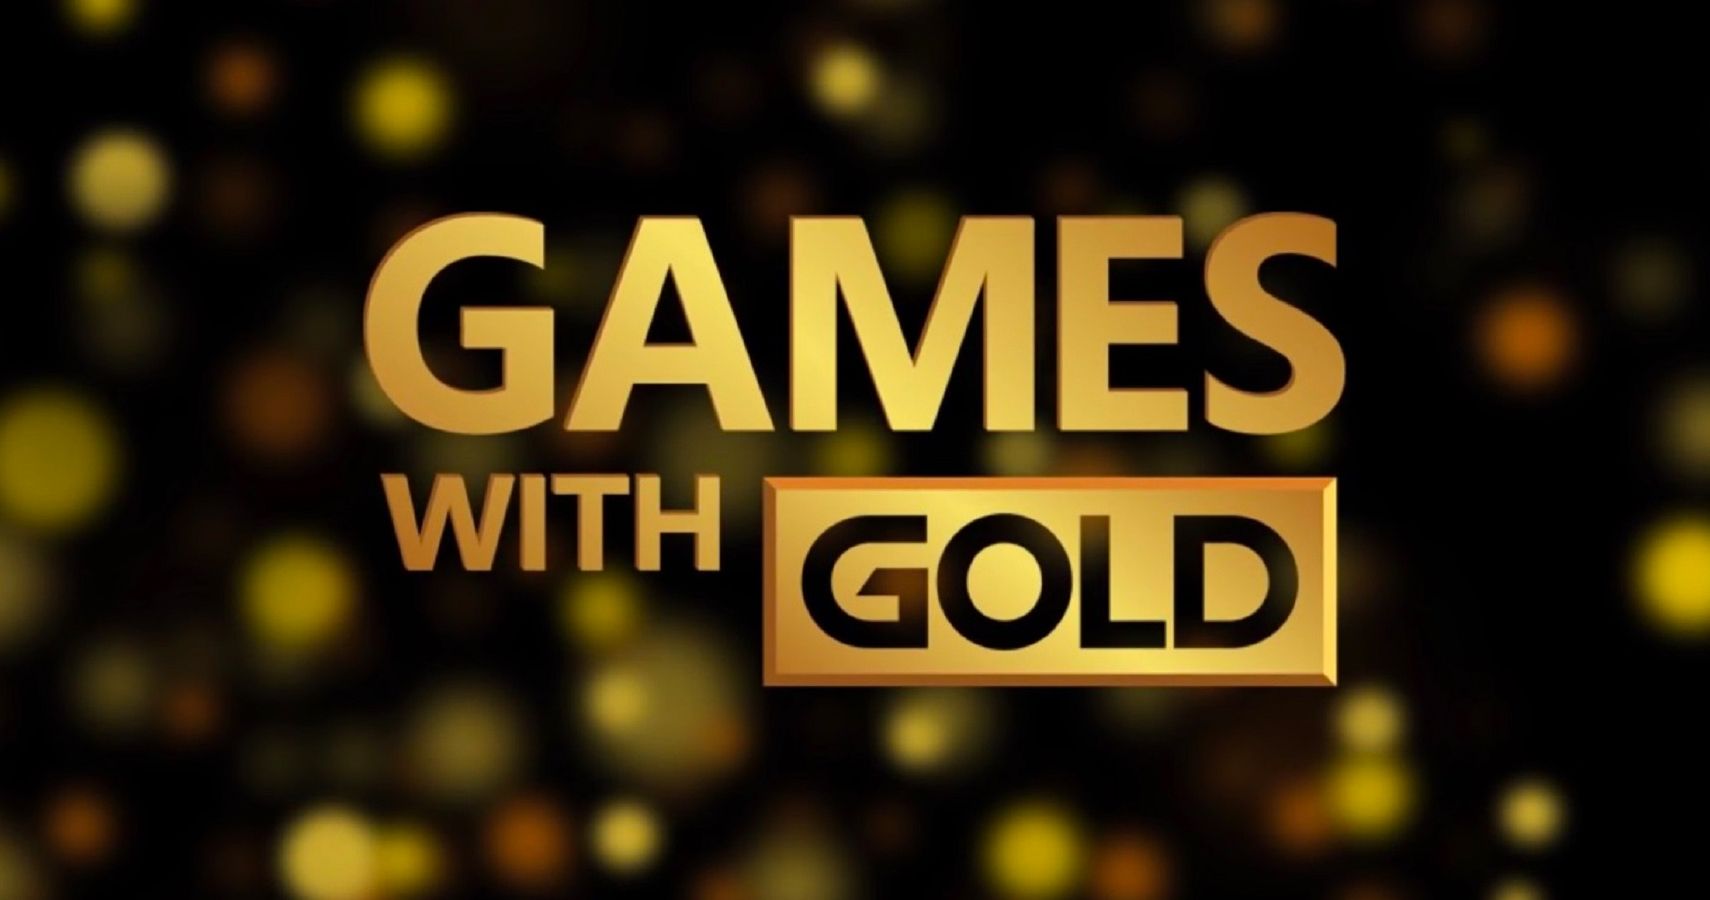 Xbox Games With Gold For March 2022 Has Leaked